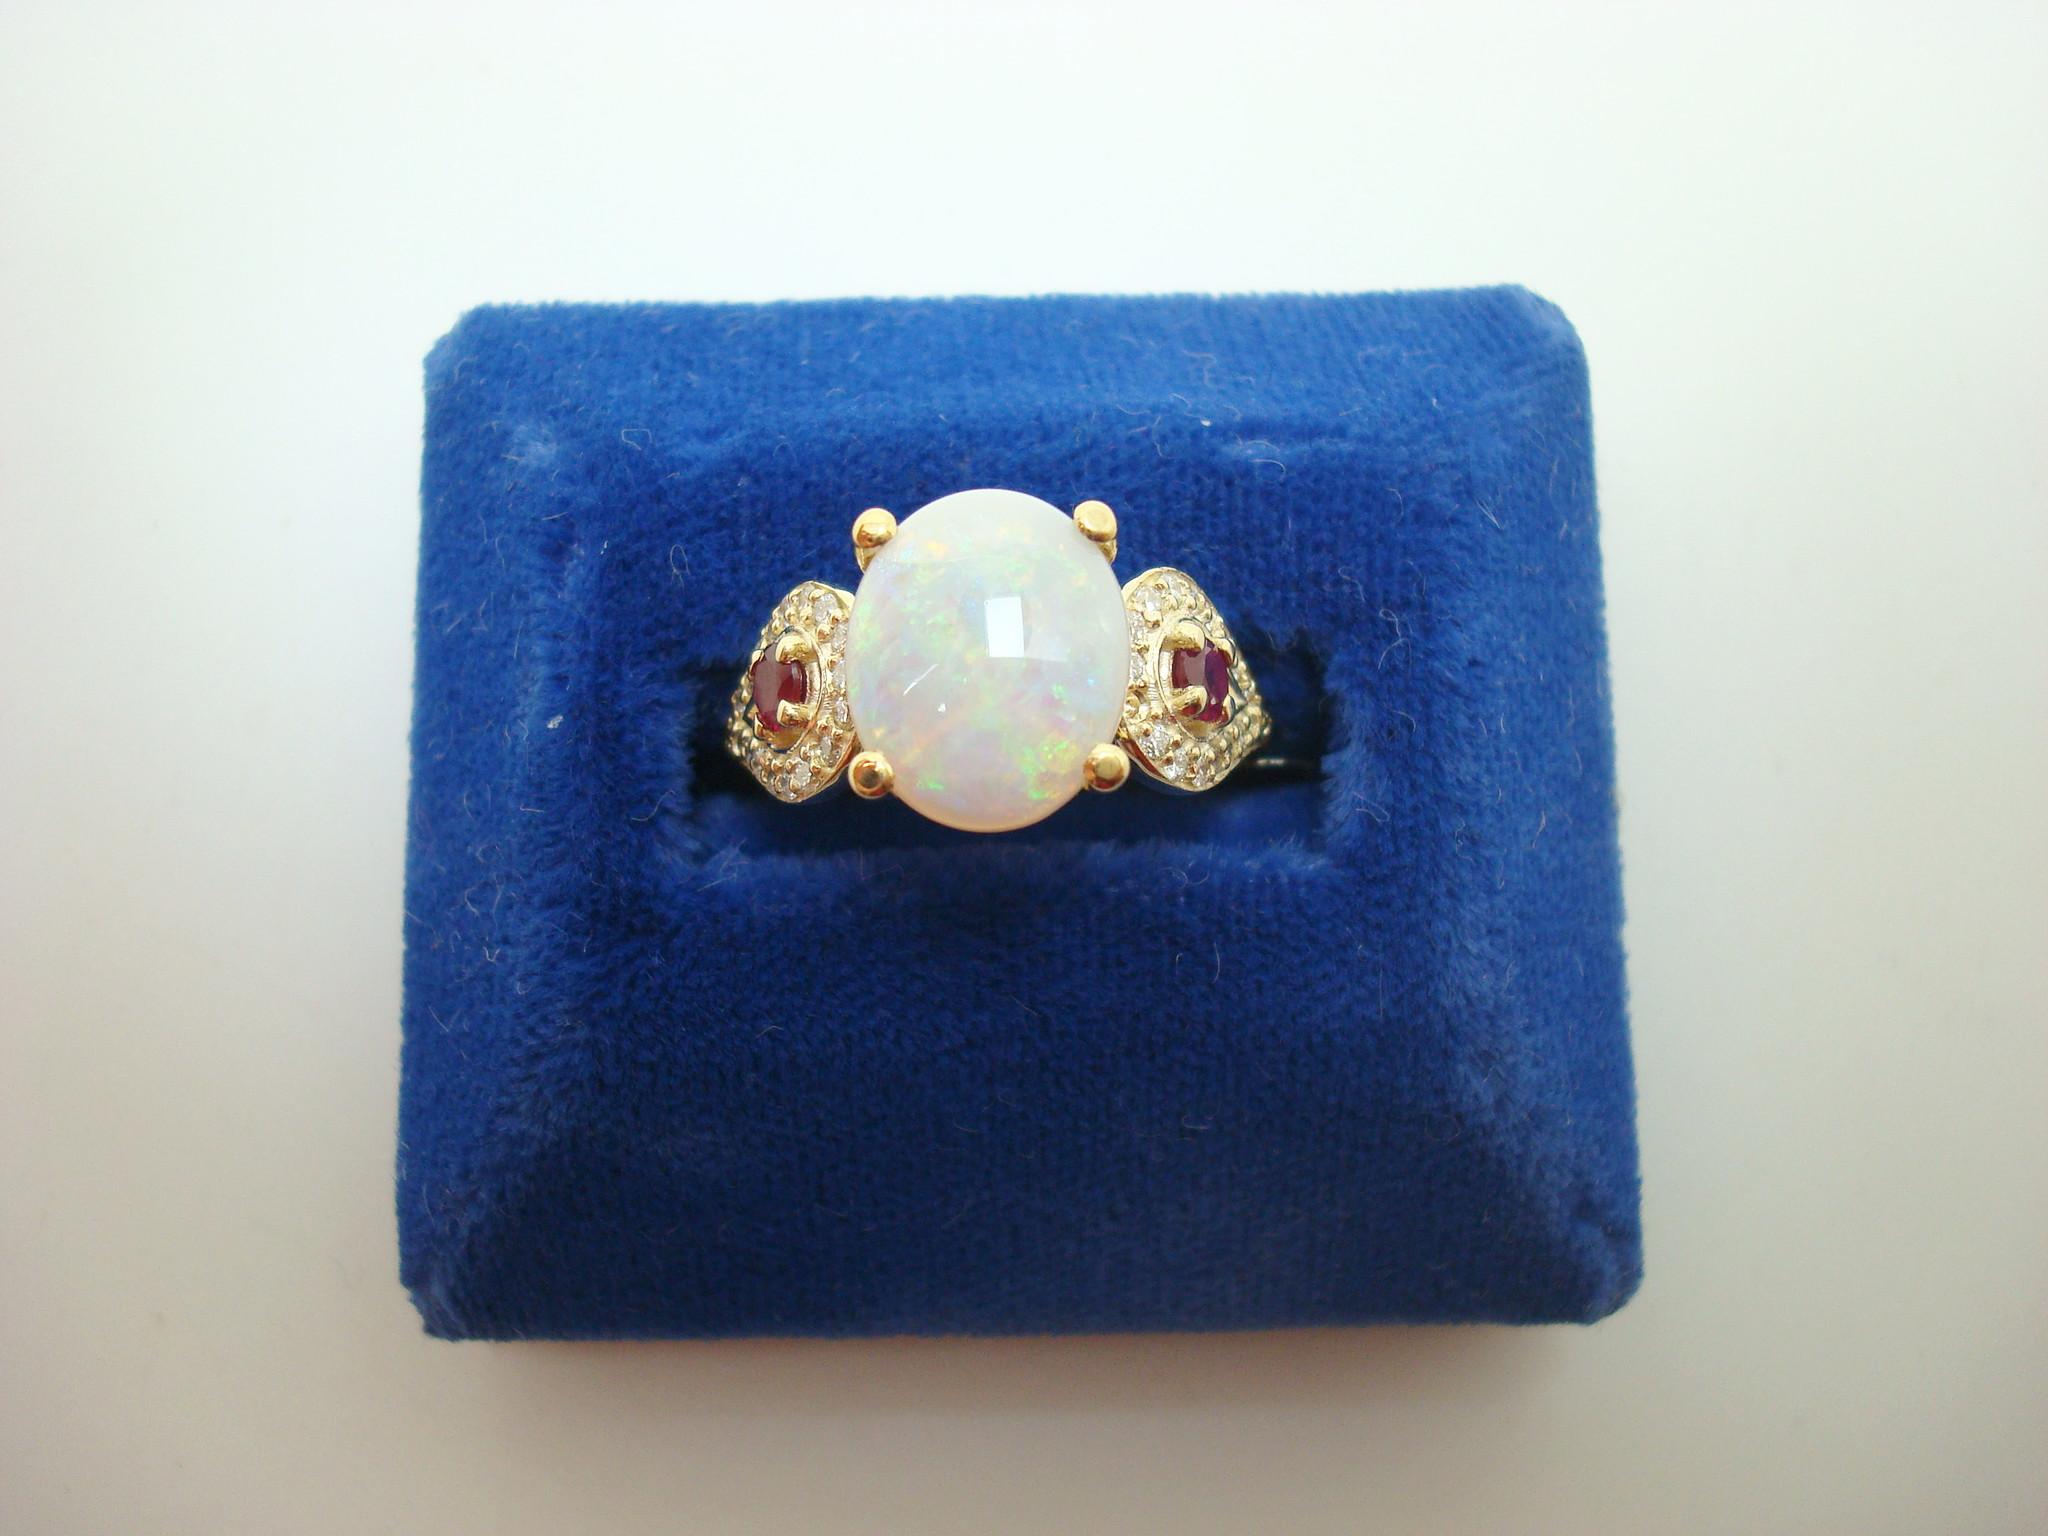 14k Yellow Gold Genuine Natural Opal Ruby and Diamond Ring (#J2650)

14k yellow gold opal, ruby, and diamond ring featuring a large oval opal weighing 2.05 carats. The opal measures about 11mm x 9mm. The opal has flashes of green, blue, and pink